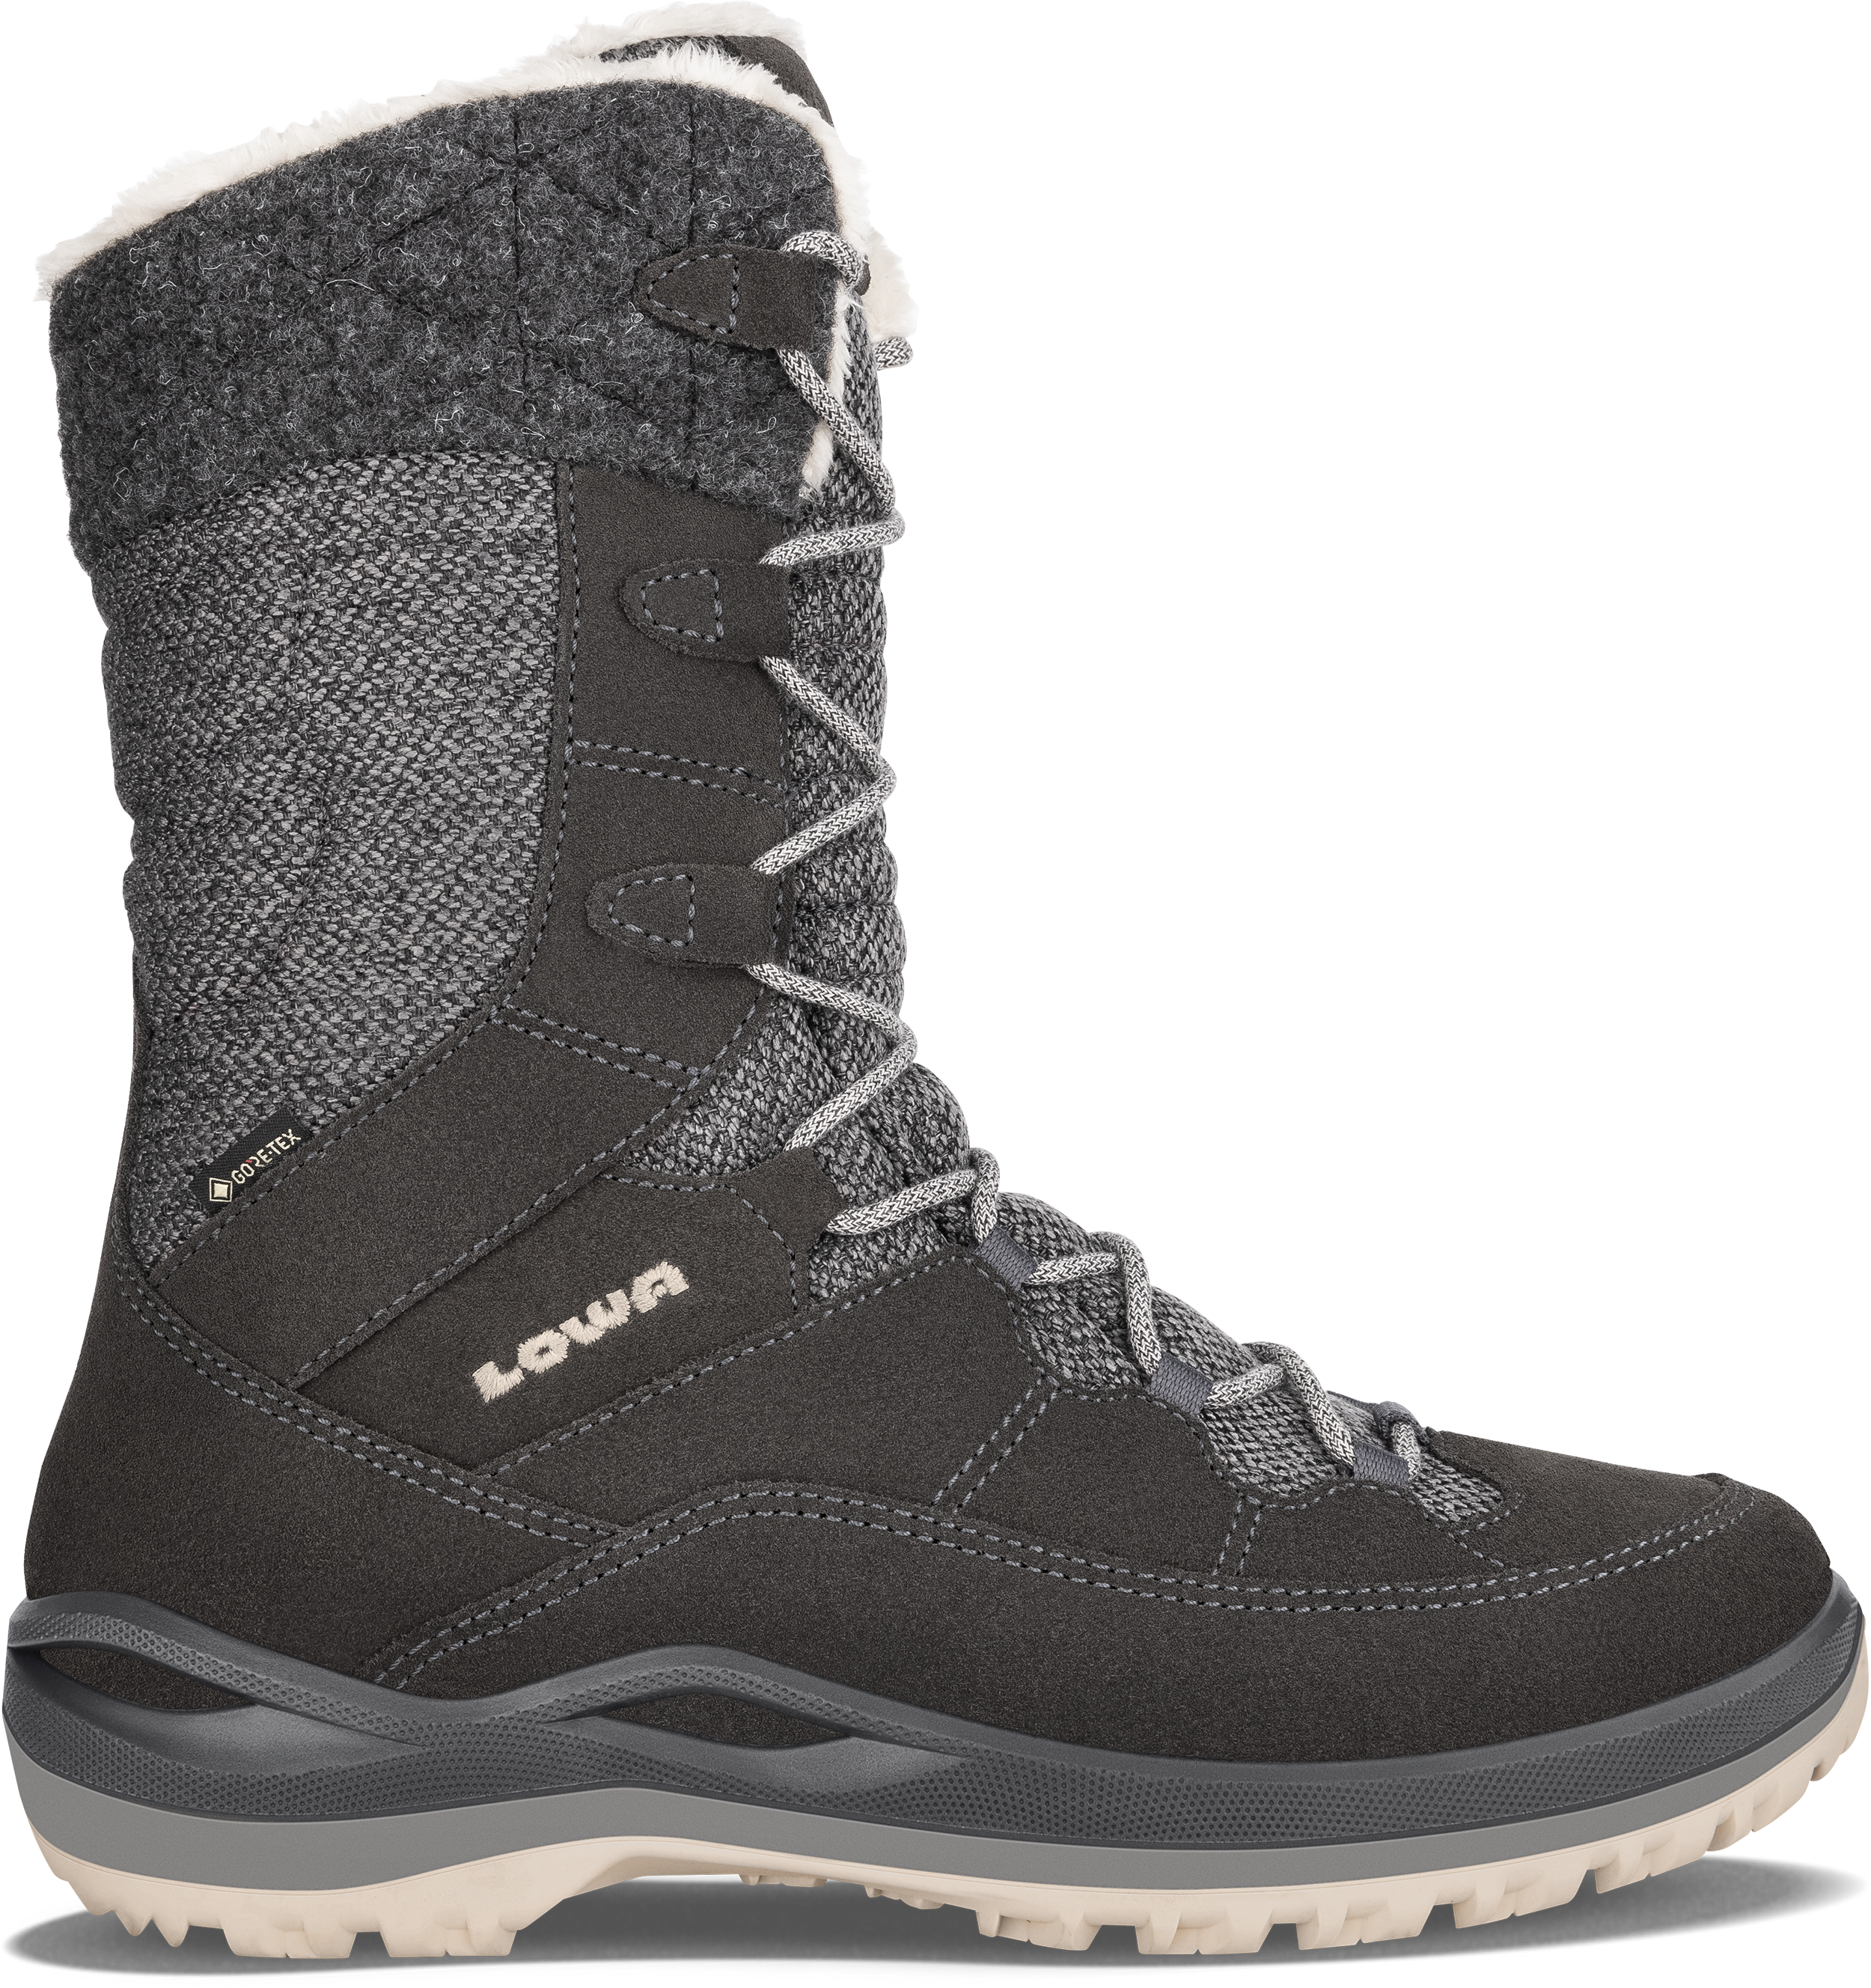 munt Rijp Moeras BARINA III GTX Ws: COLD WEATHER BOOTS for women | LOWA INT